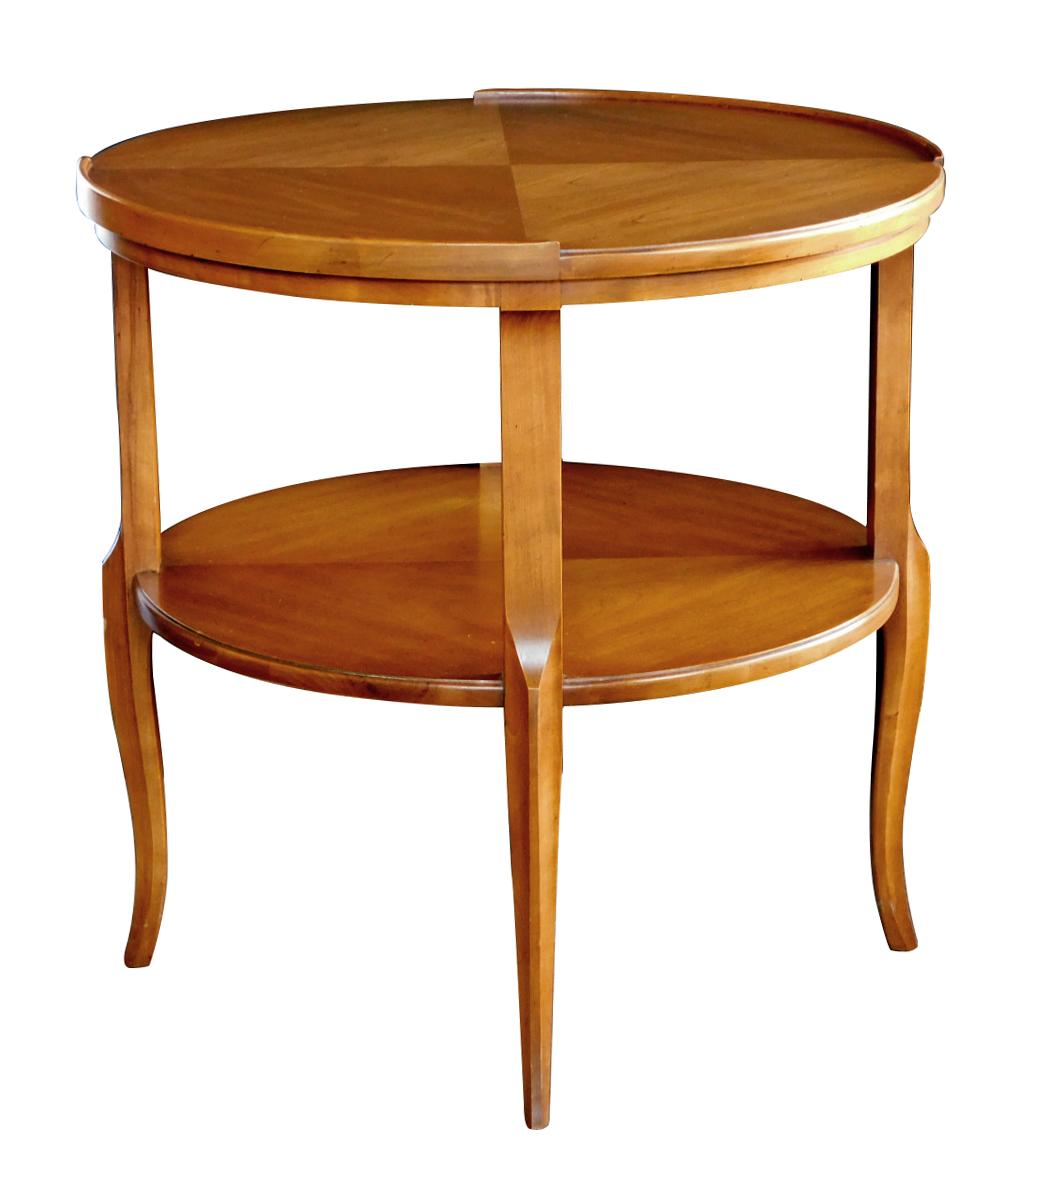 Stylish 1960s Circular Cherrywood Side/End Table by Widdicomb In Good Condition For Sale In San Francisco, CA